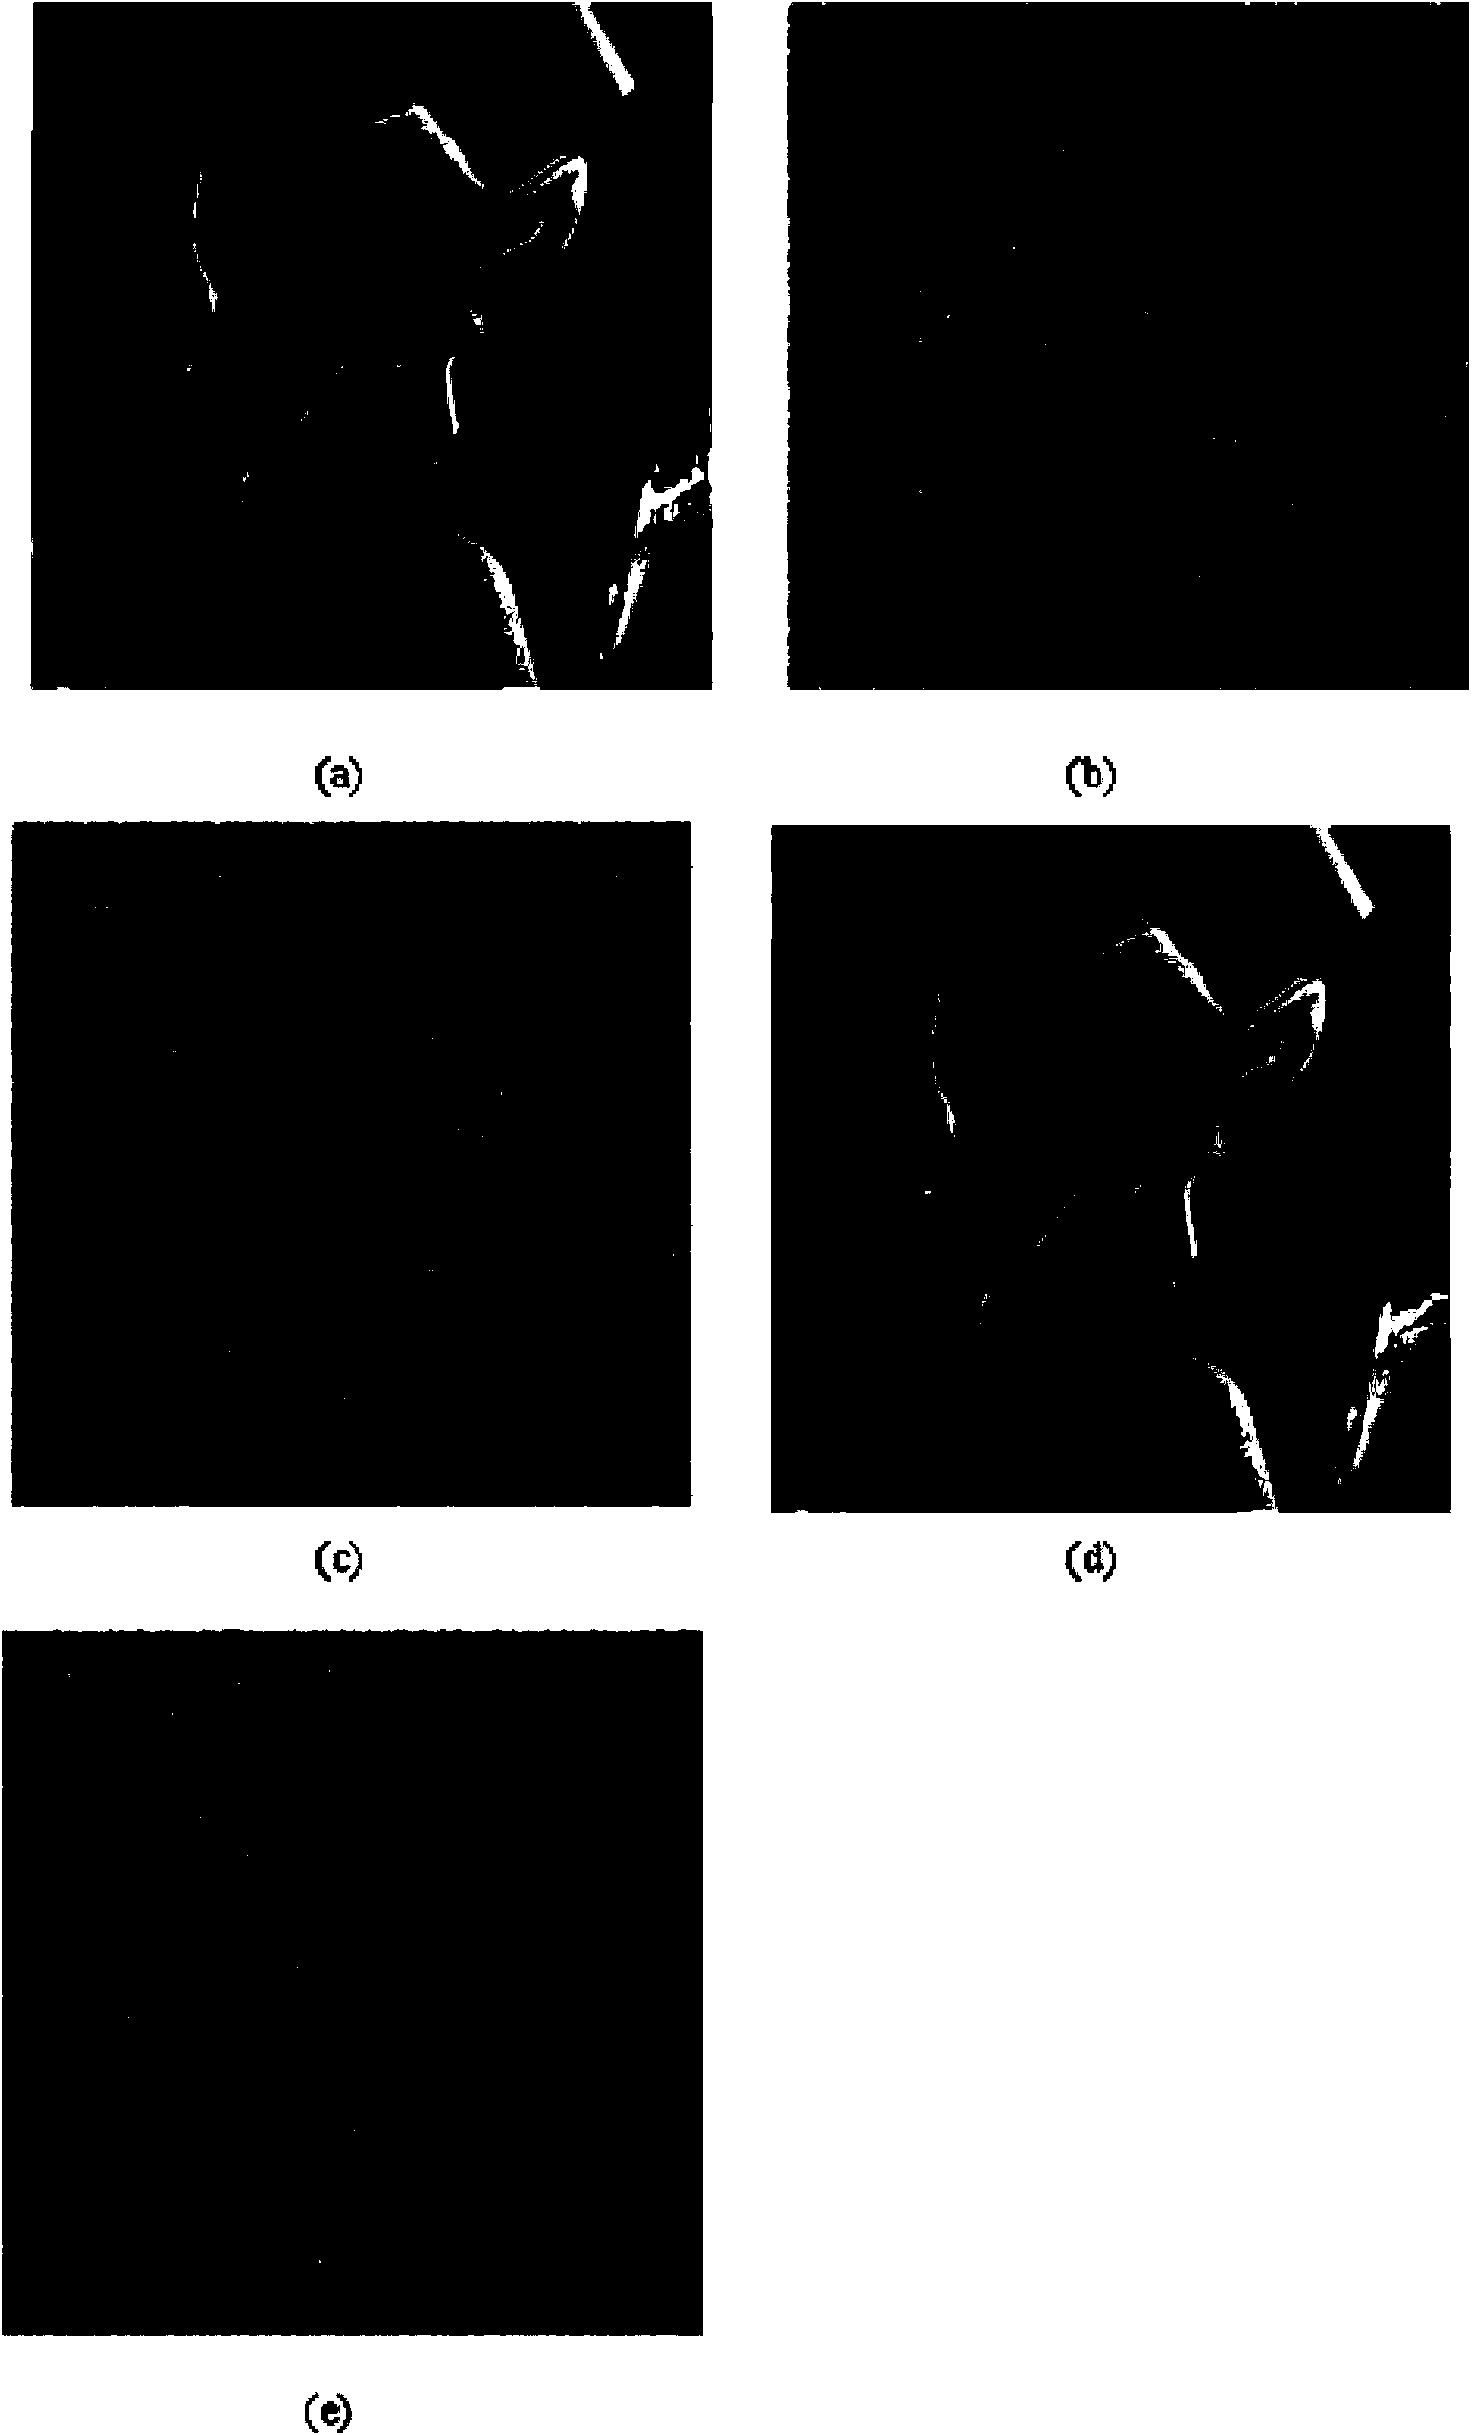 Color image encryption method based on chaos sequence and hyper-chaos system